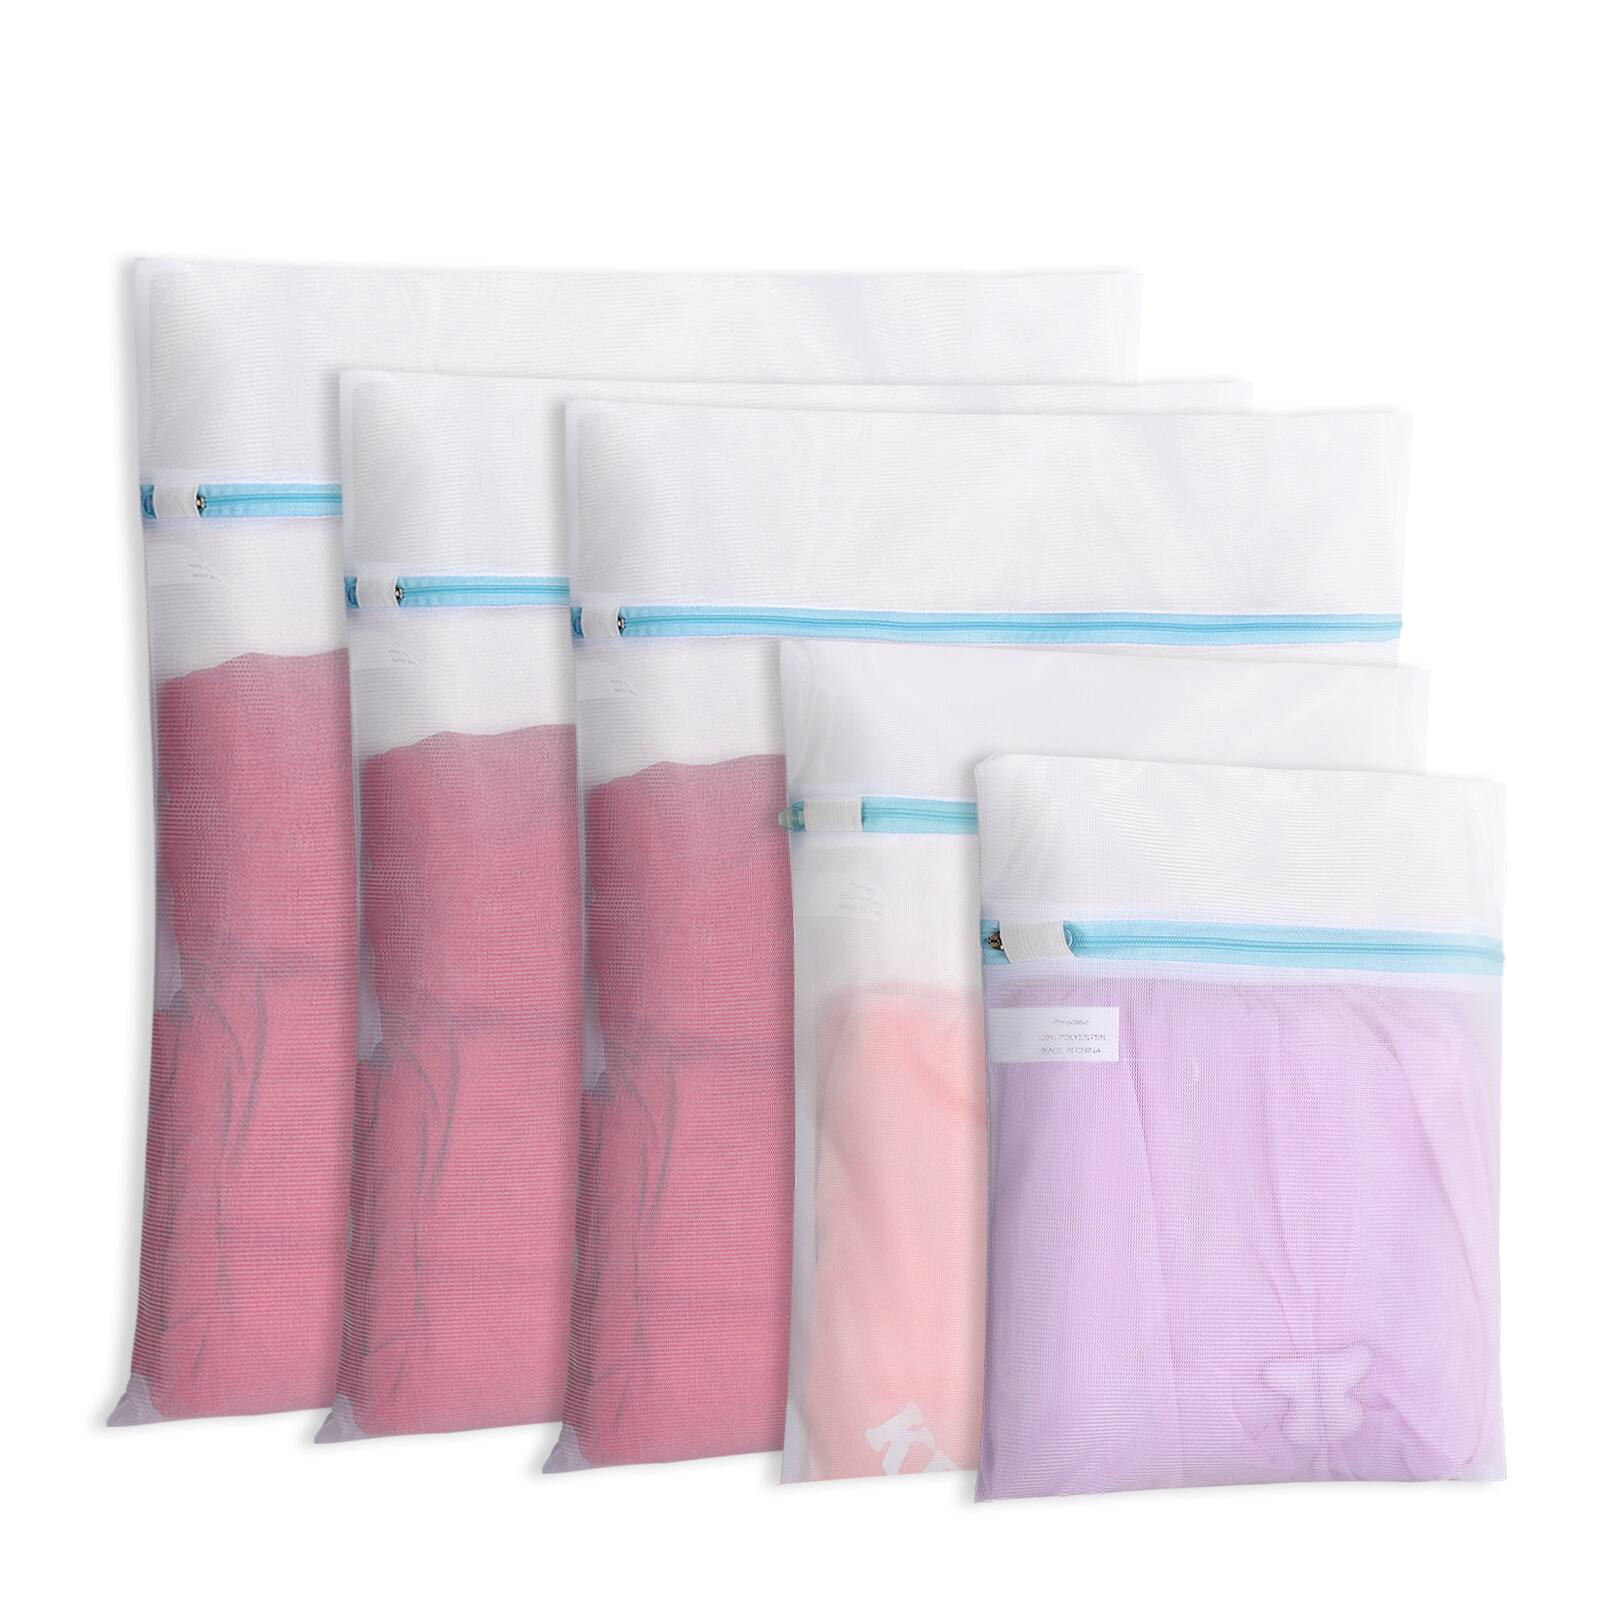 5 Pack Mesh Laundry Bags with Premium Zippers for Lingerie & Delicate for $6.39